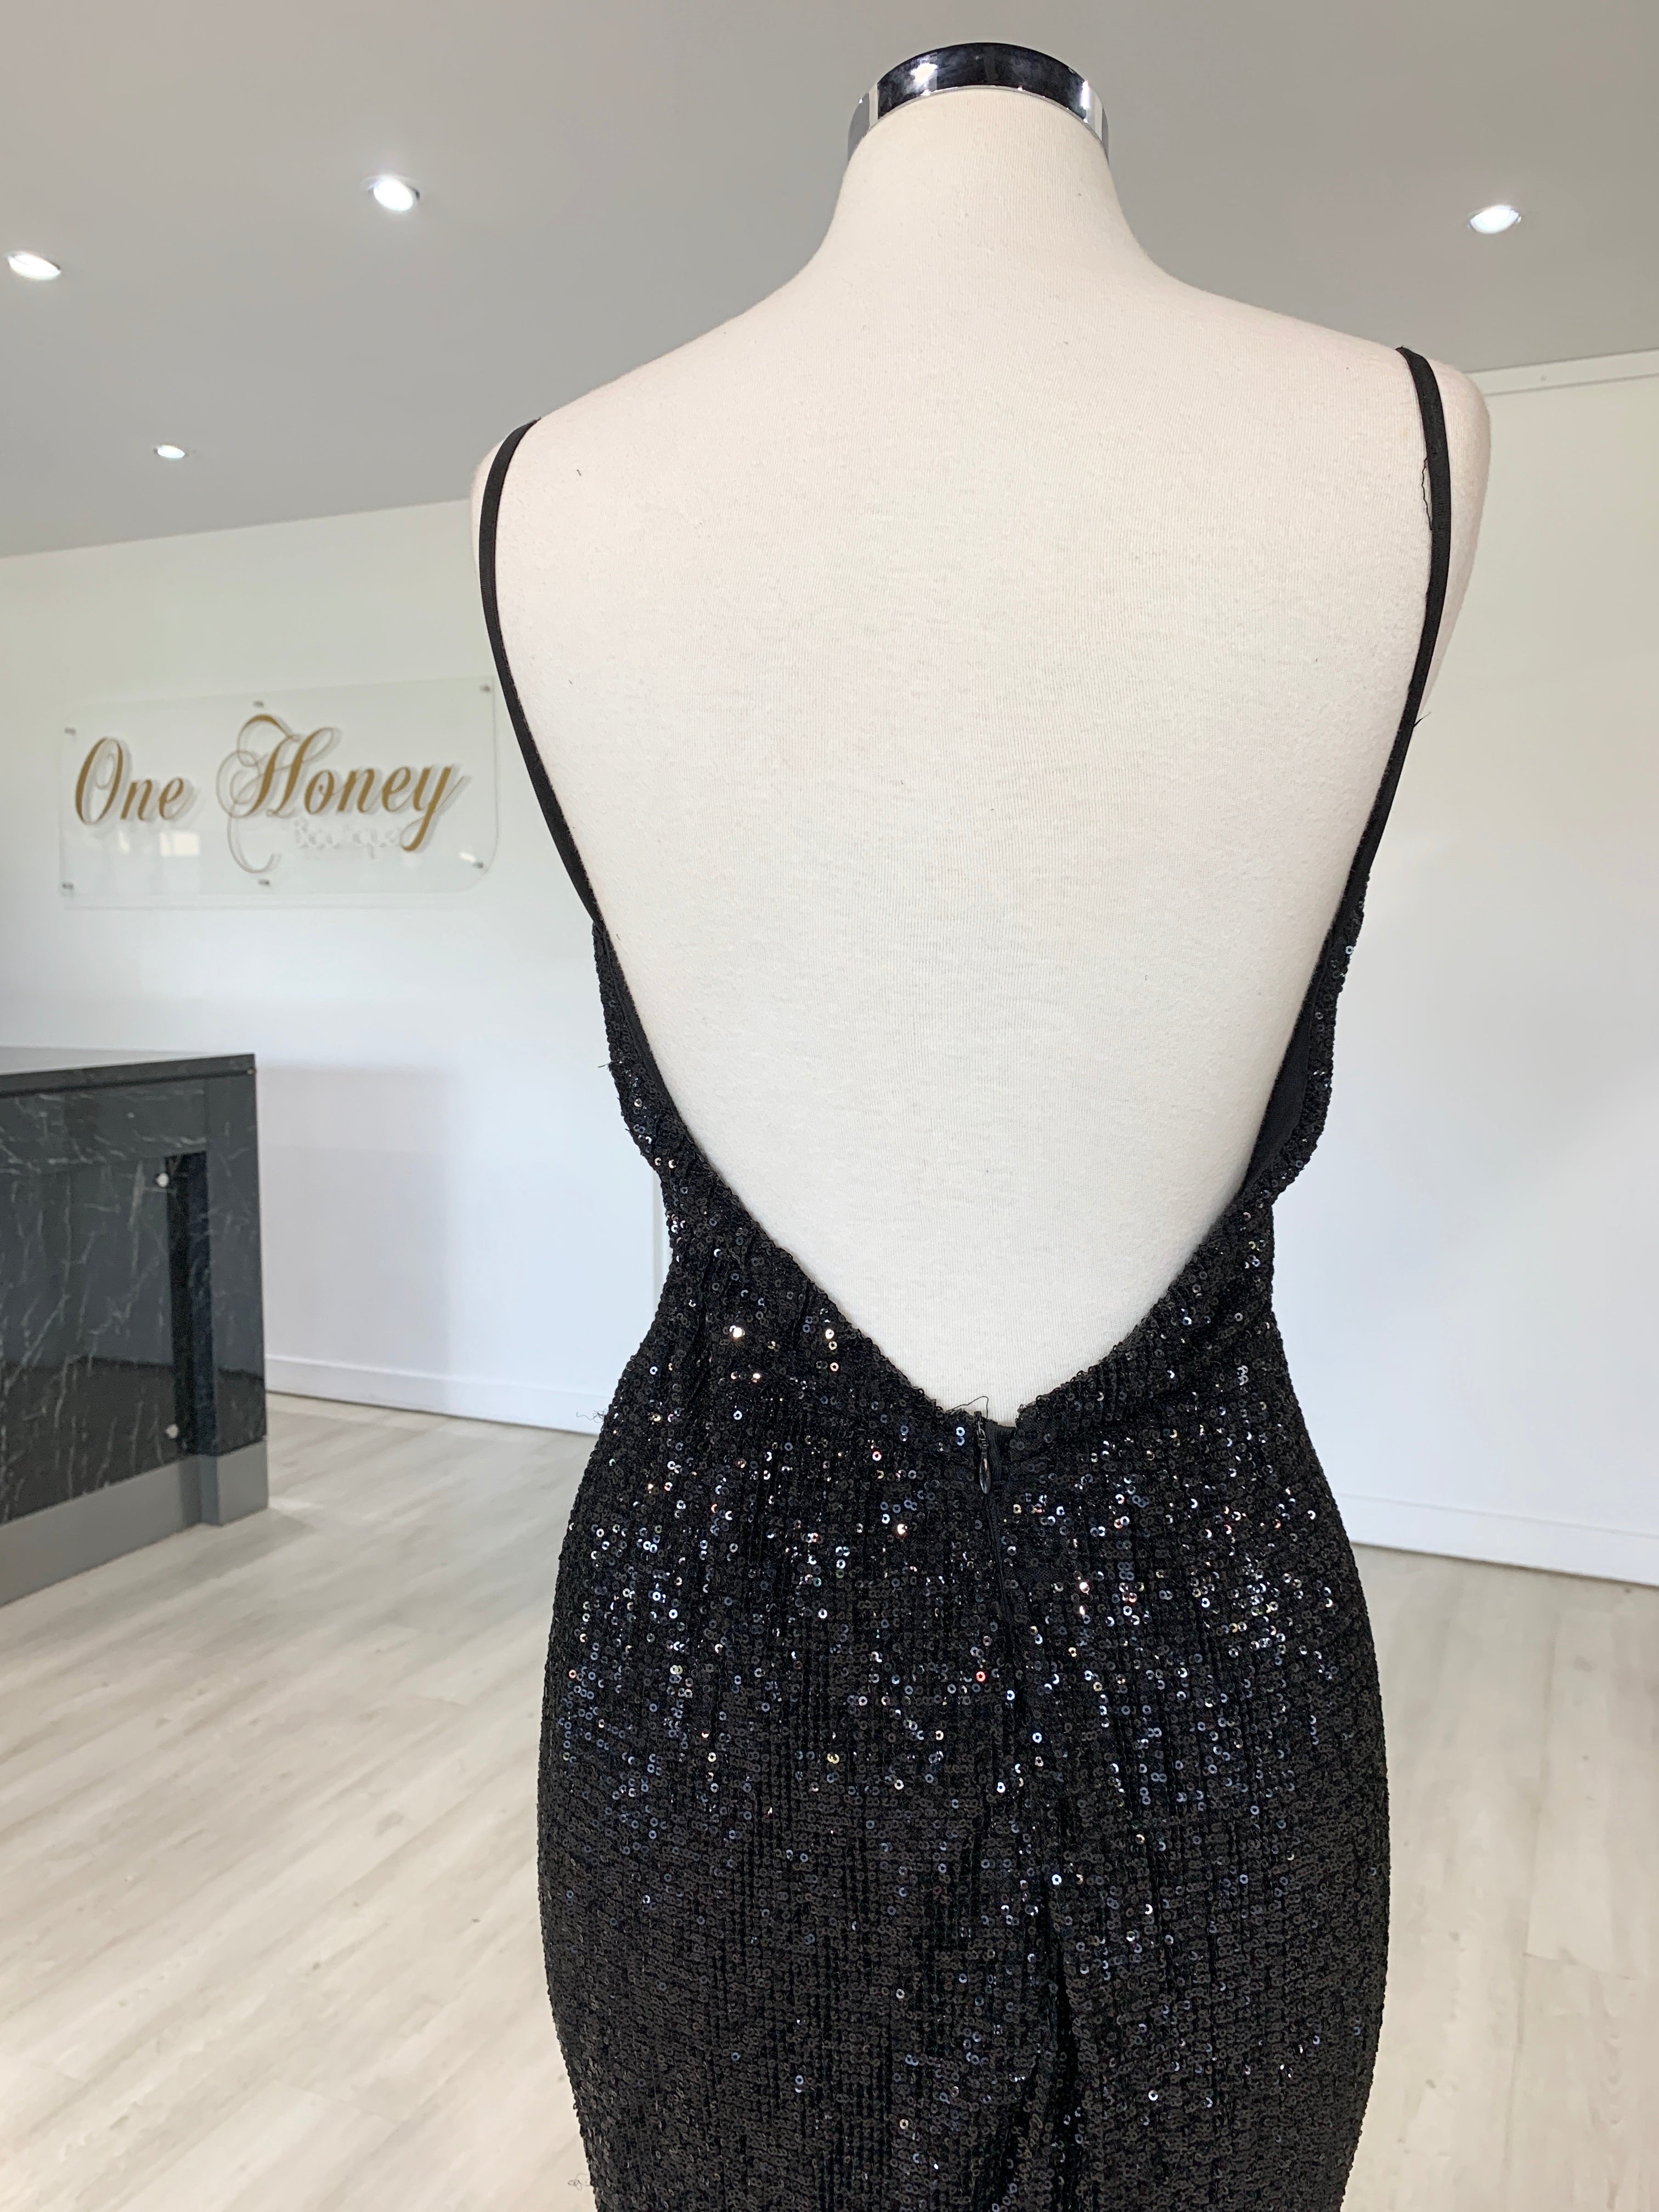 Honey Couture ROSALIE Black Low Back Sequin Formal Gown Dress {vendor} AfterPay Humm ZipPay LayBuy Sezzle